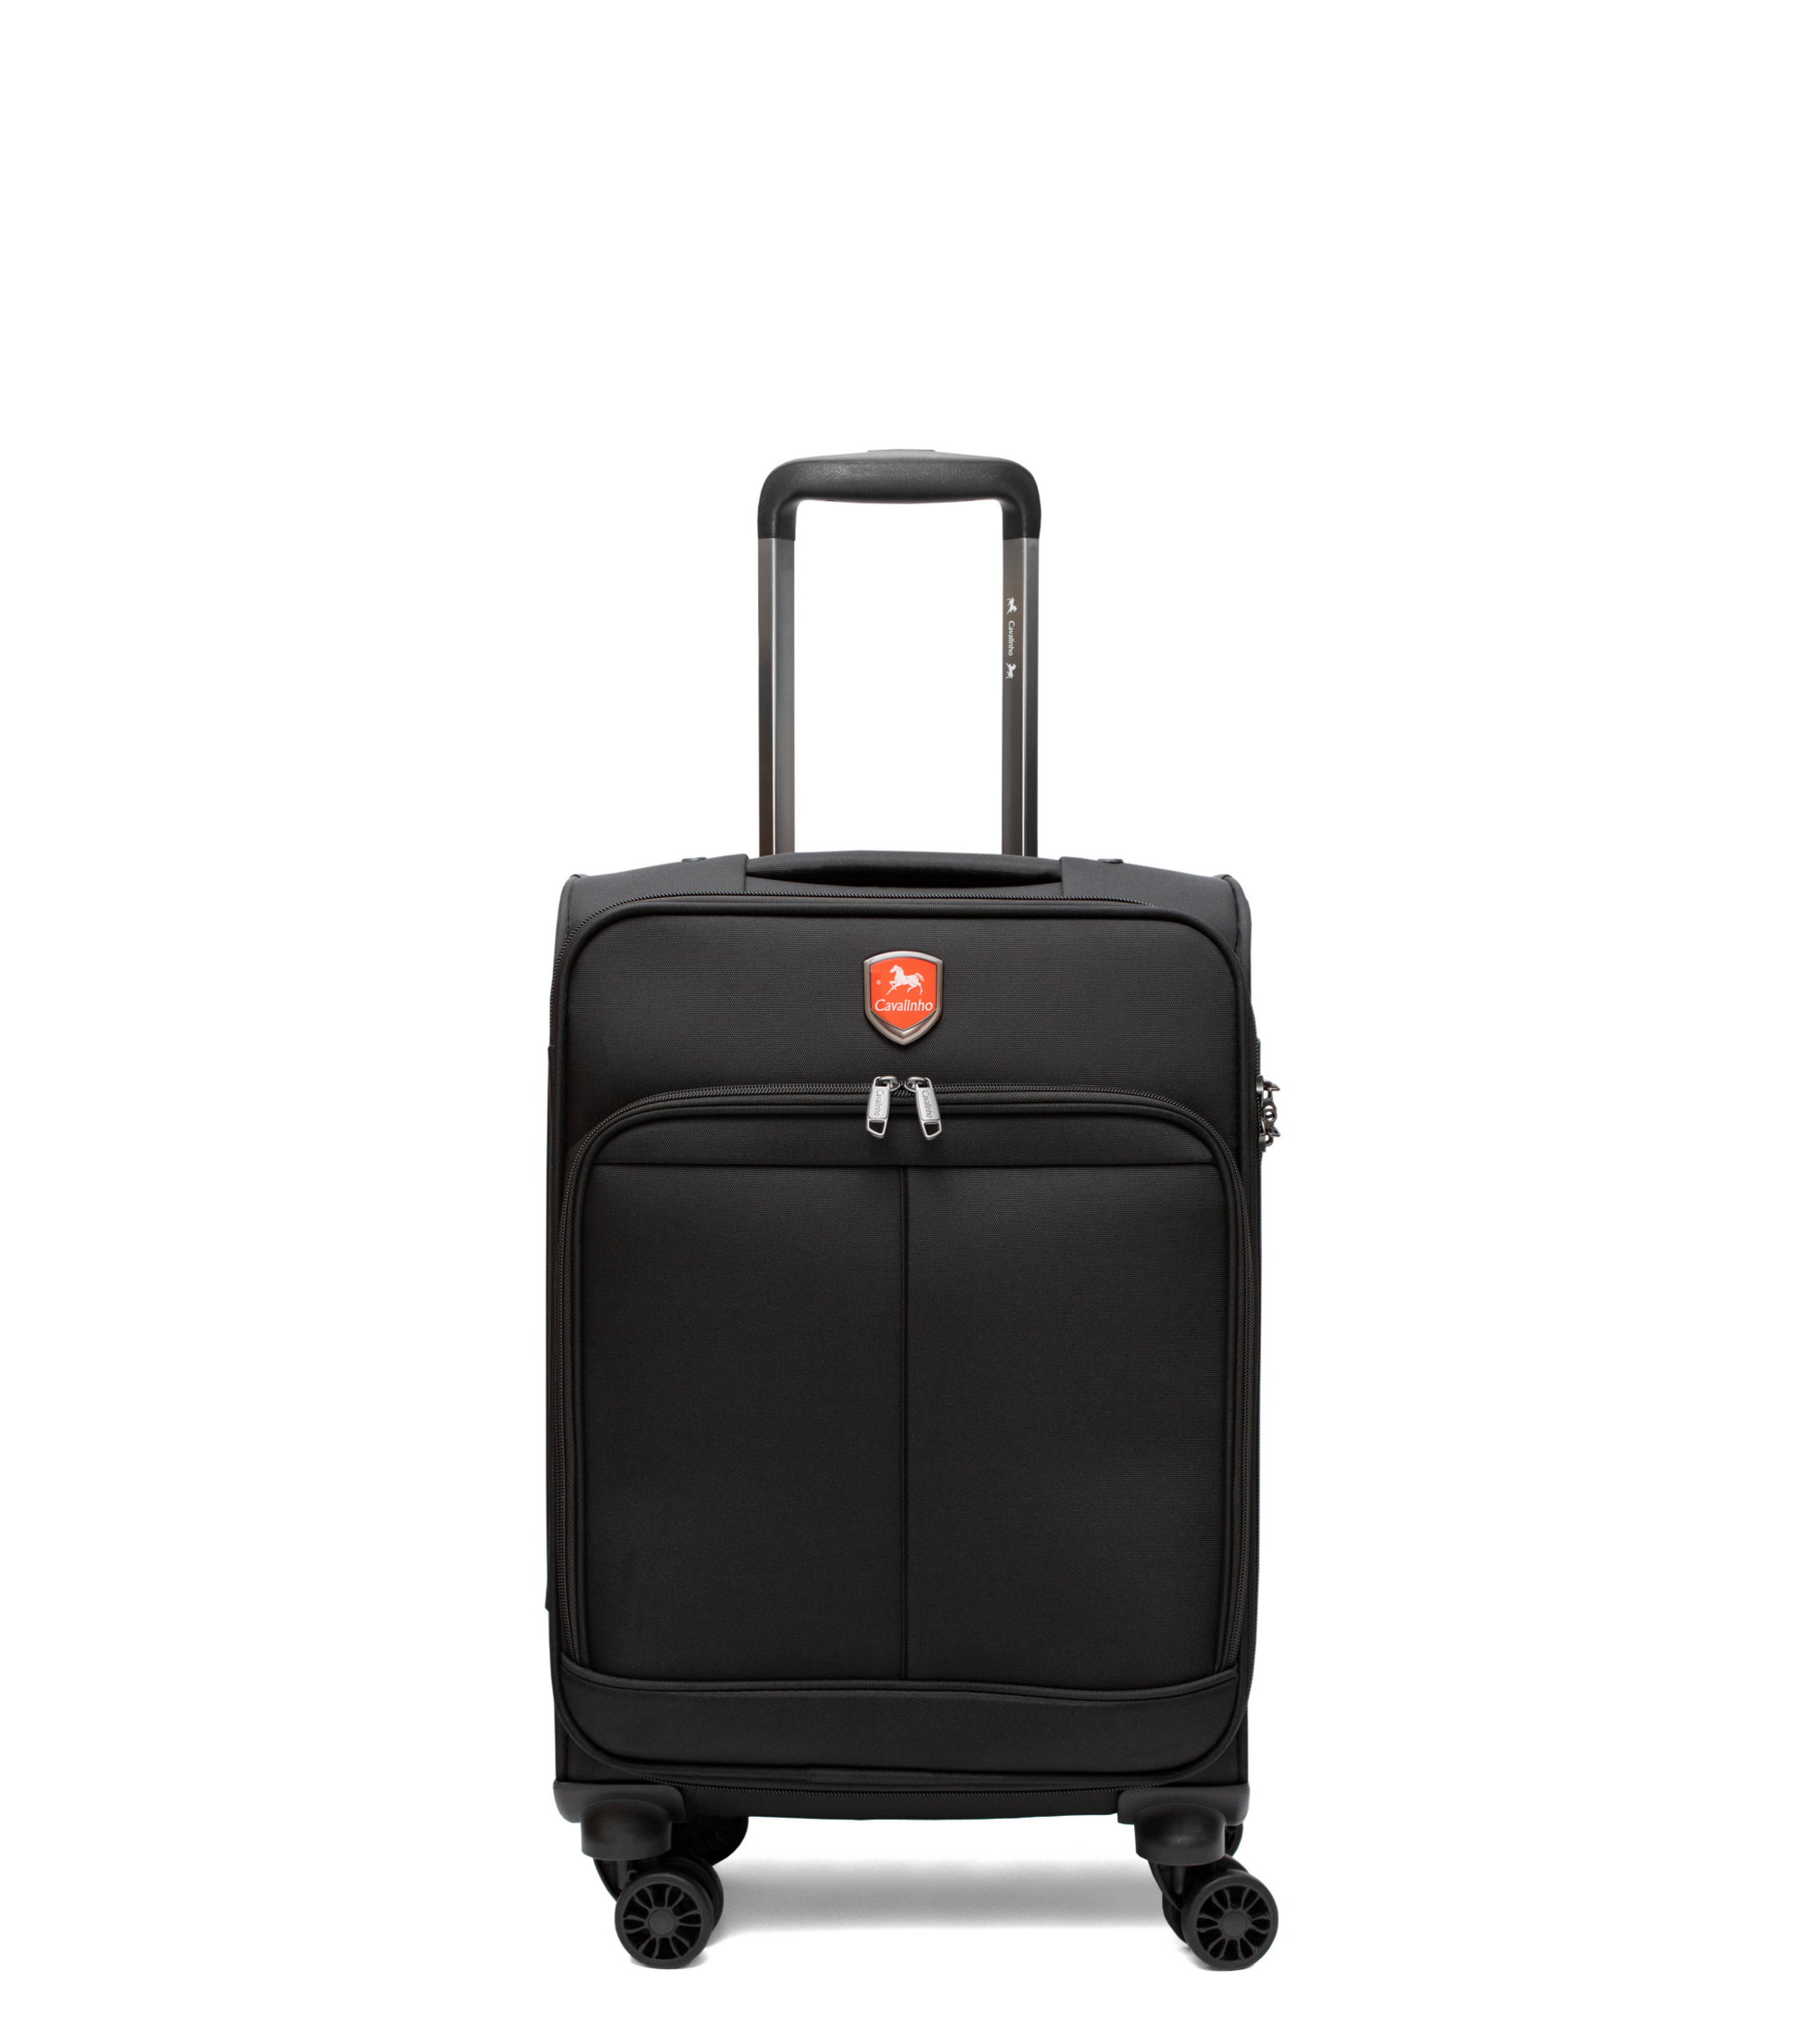 #color_ 19 inch Black | Cavalinho Carry-on Softside Cabin Luggage (16" or 19") - 19 inch Black - 68020003.01.19_1_4e2abab5-9d55-4993-a48f-2ac08929a27b